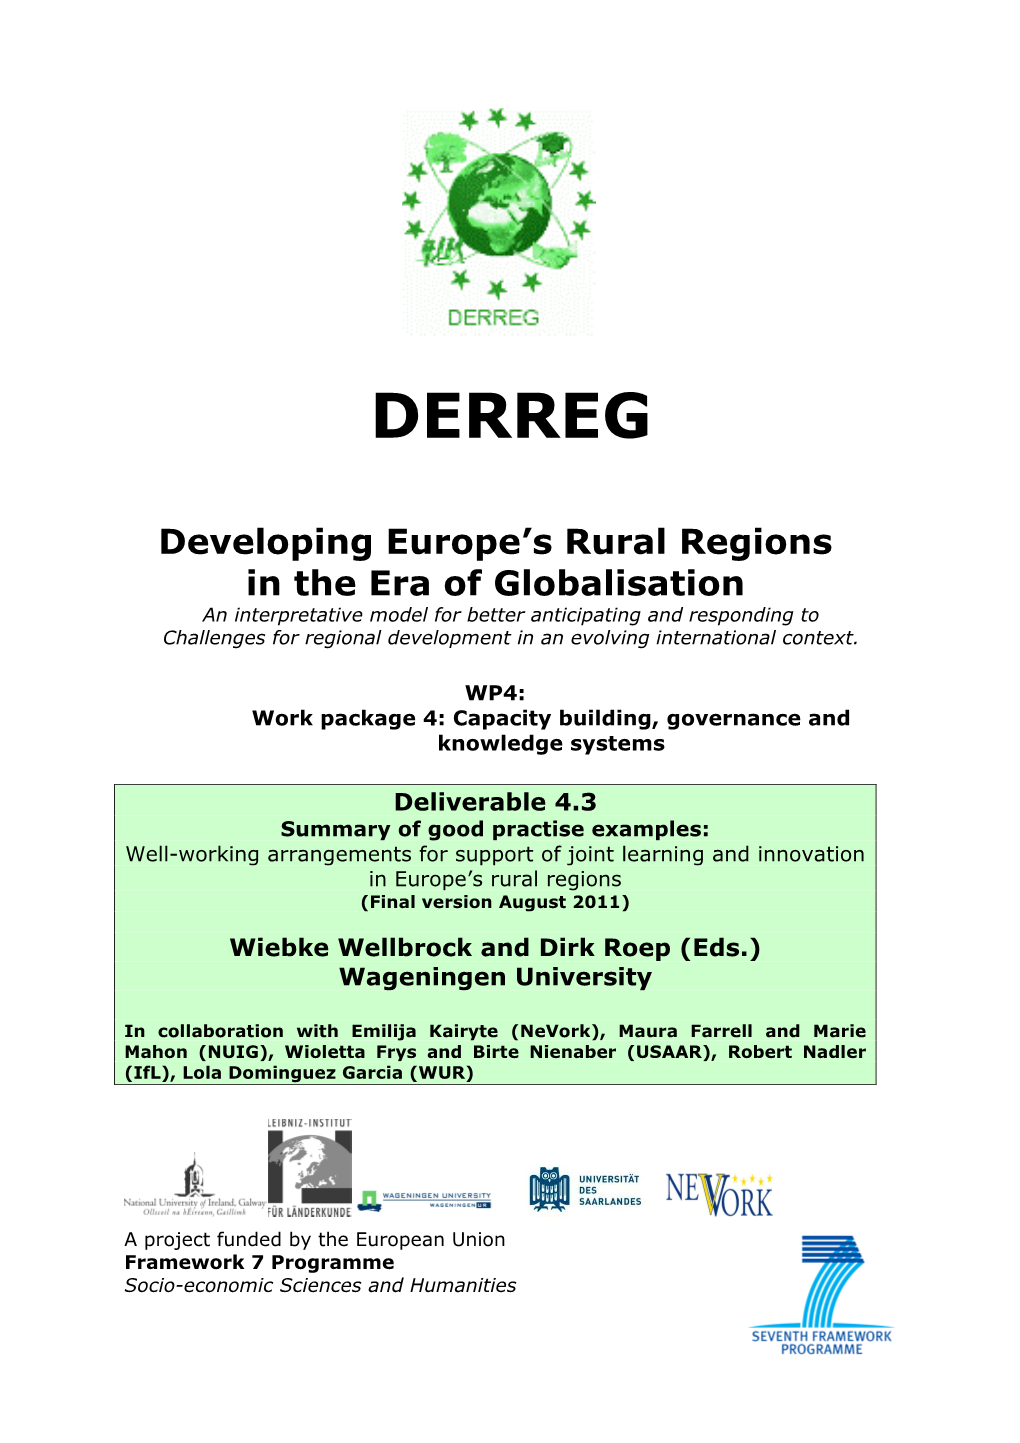 Working Arrangements for Support of Joint Learning and Innovation in Europe’S Rural Regions (Final Version August 2011)